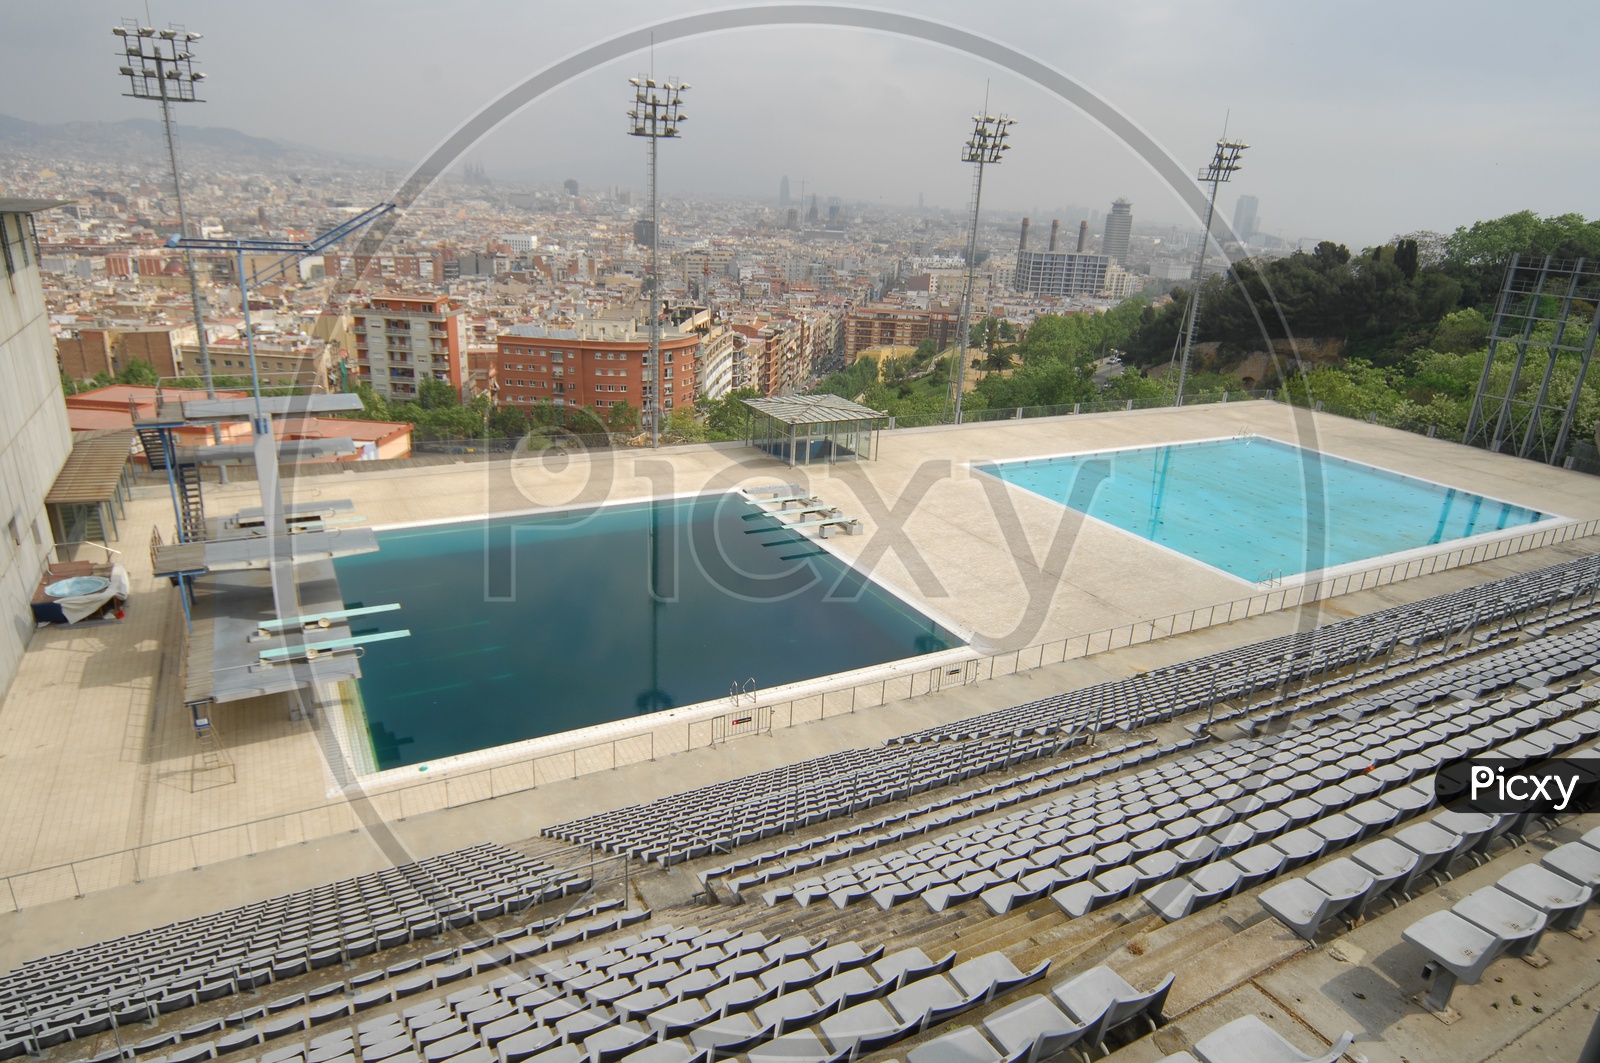 Seating arrangement of audience by the swimming pool